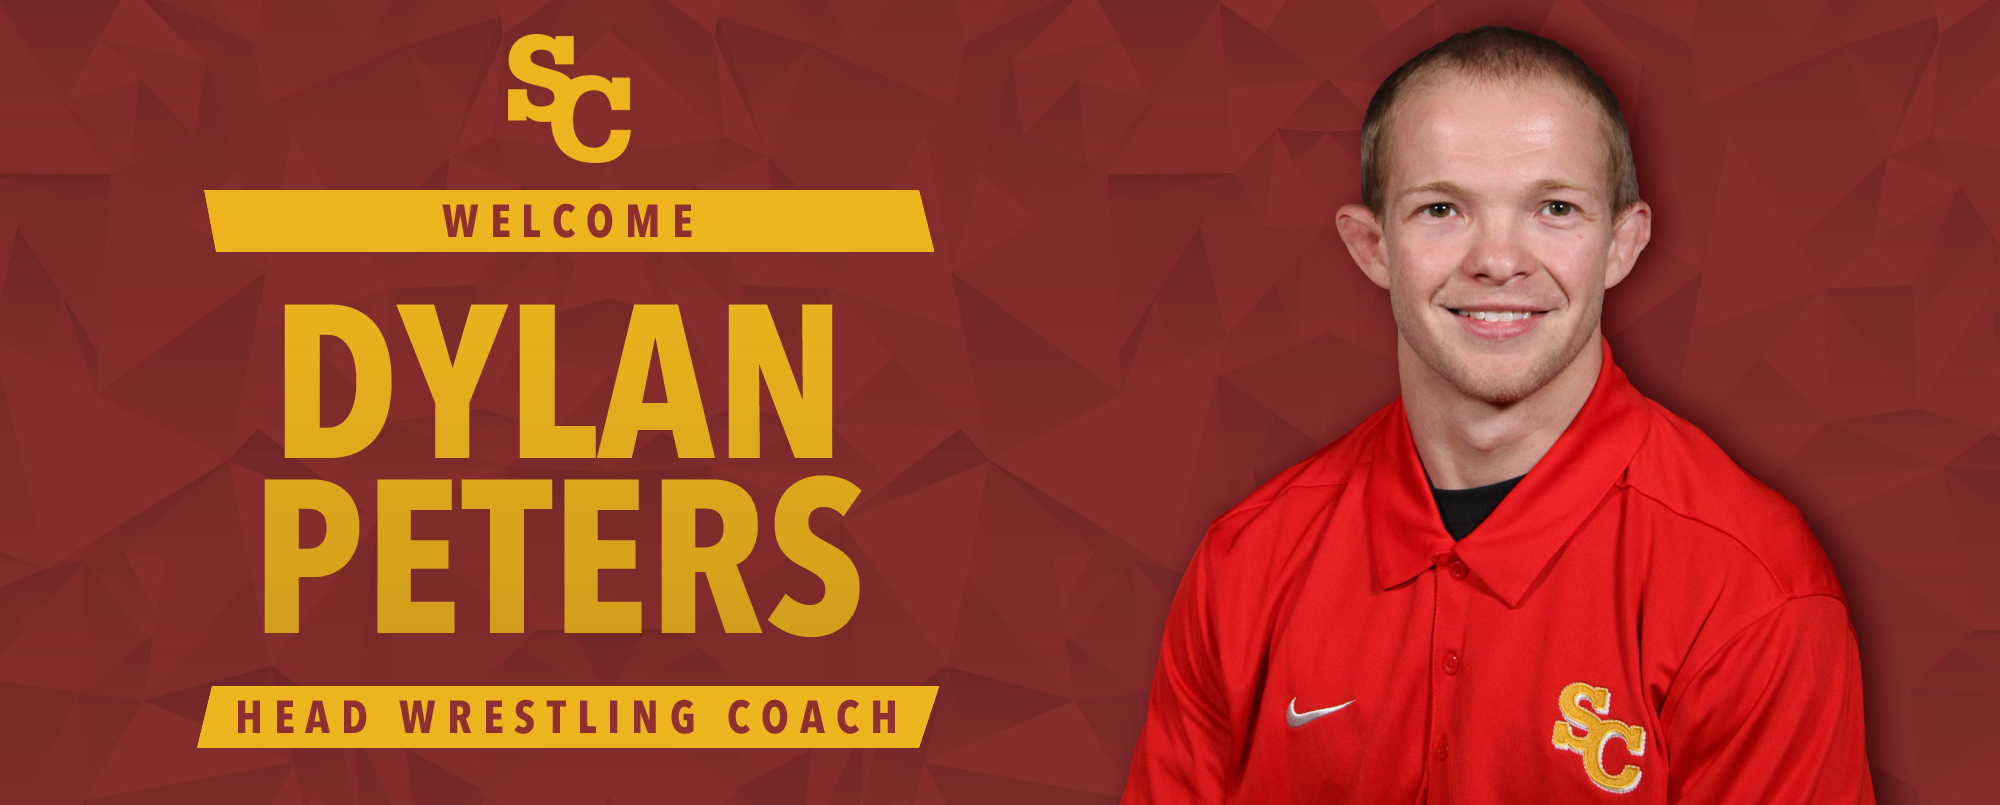 Dylan Peters hired as wrestling coach